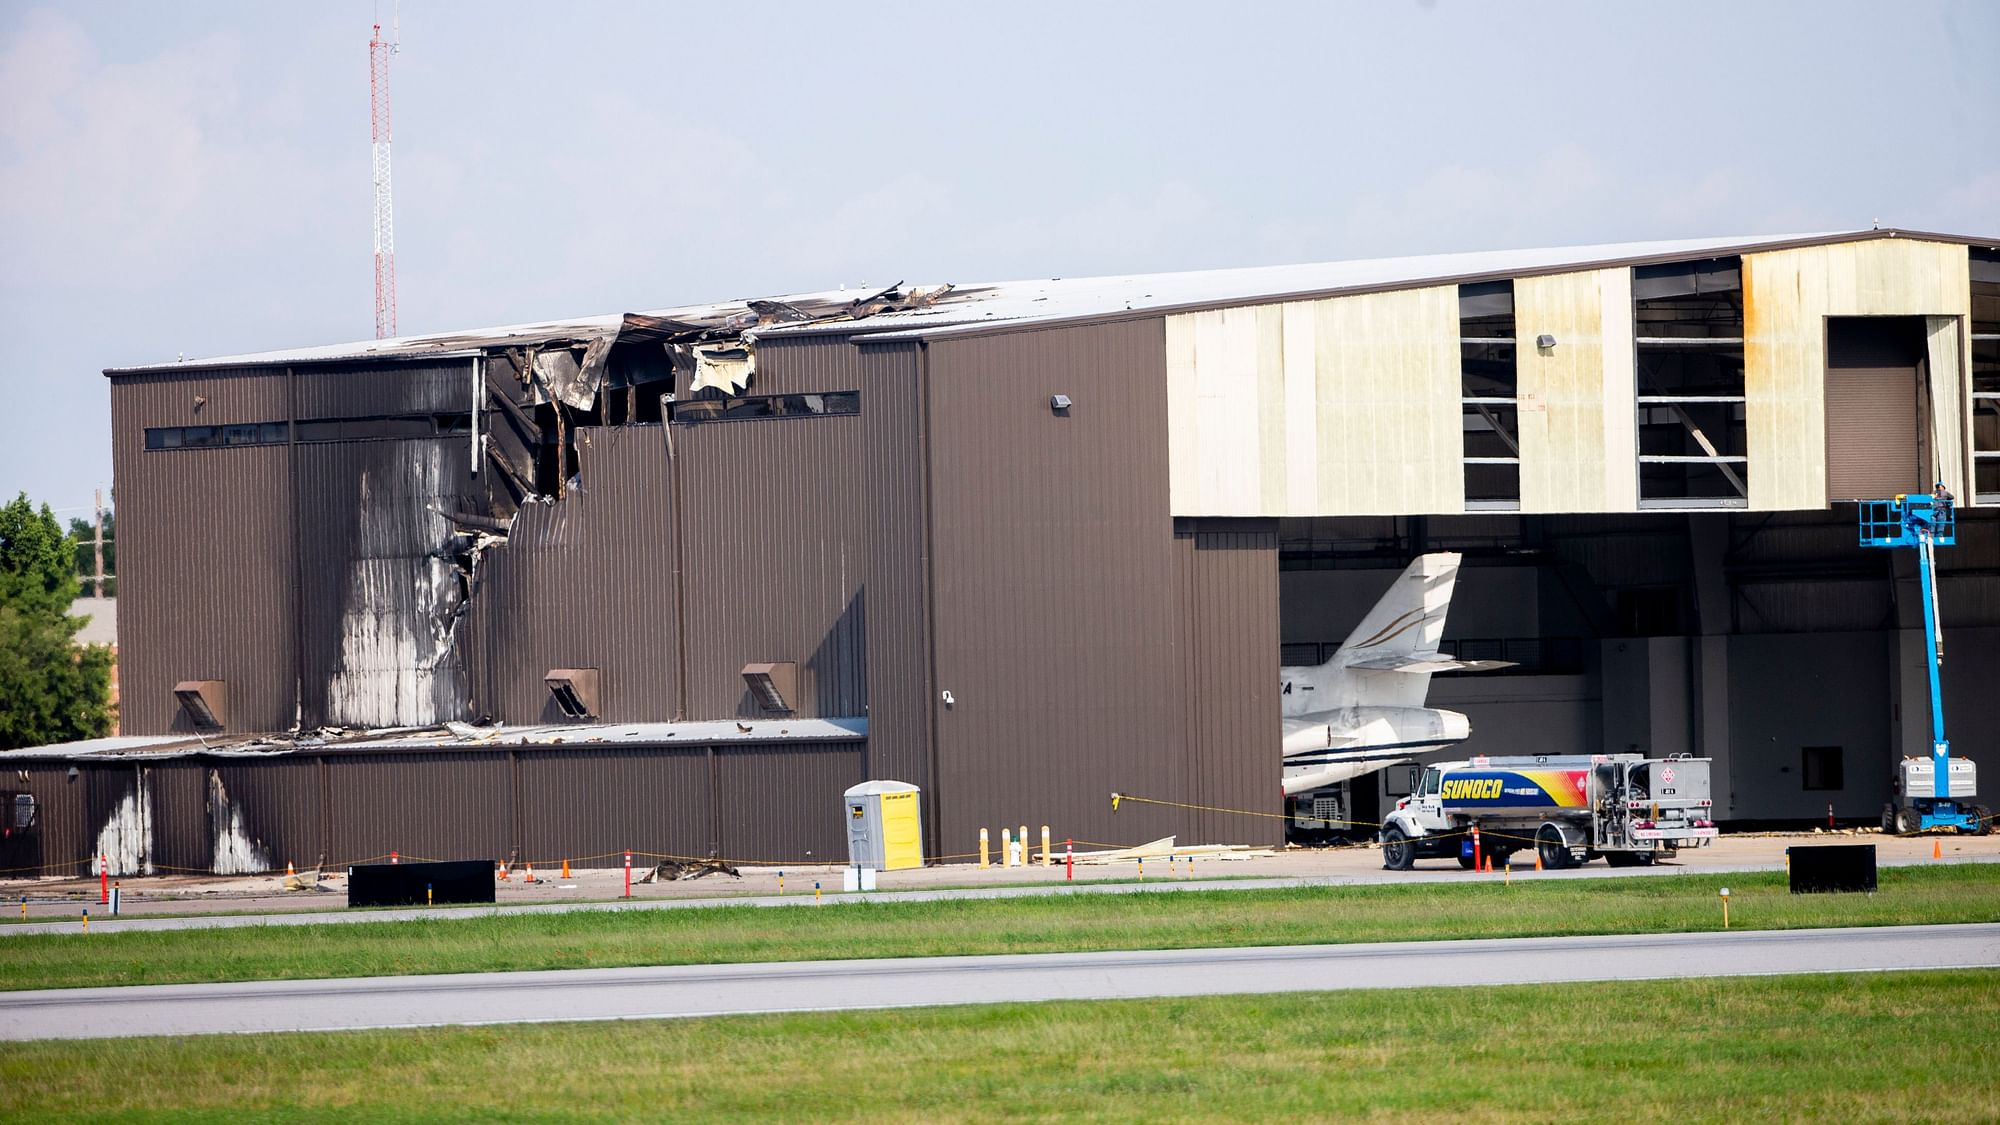 Damage is seen to a hangar after a twin-engine plane crashed into the building at Addison Airport in Addison, Texas.